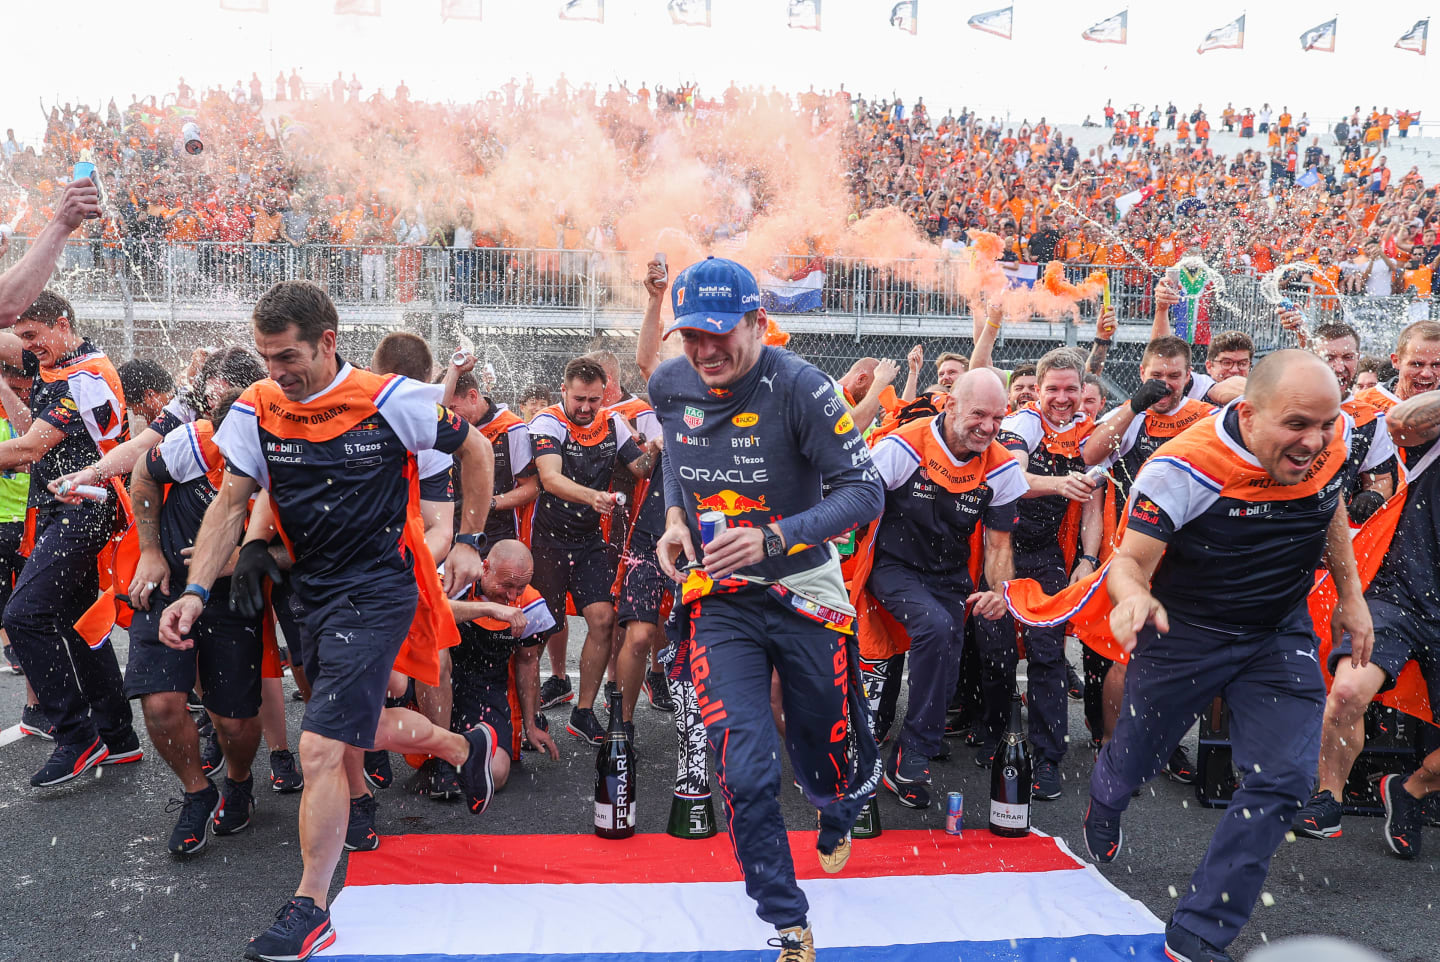 ZANDVOORT, NETHERLANDS - SEPTEMBER 04: Max Verstappen of Red Bull Racing and The Netherlands celebrates with the team after finishing in first position during the F1 Grand Prix of The Netherlands at Circuit Zandvoort on September 04, 2022 in Zandvoort, Netherlands. (Photo by Peter Fox/Getty Images)